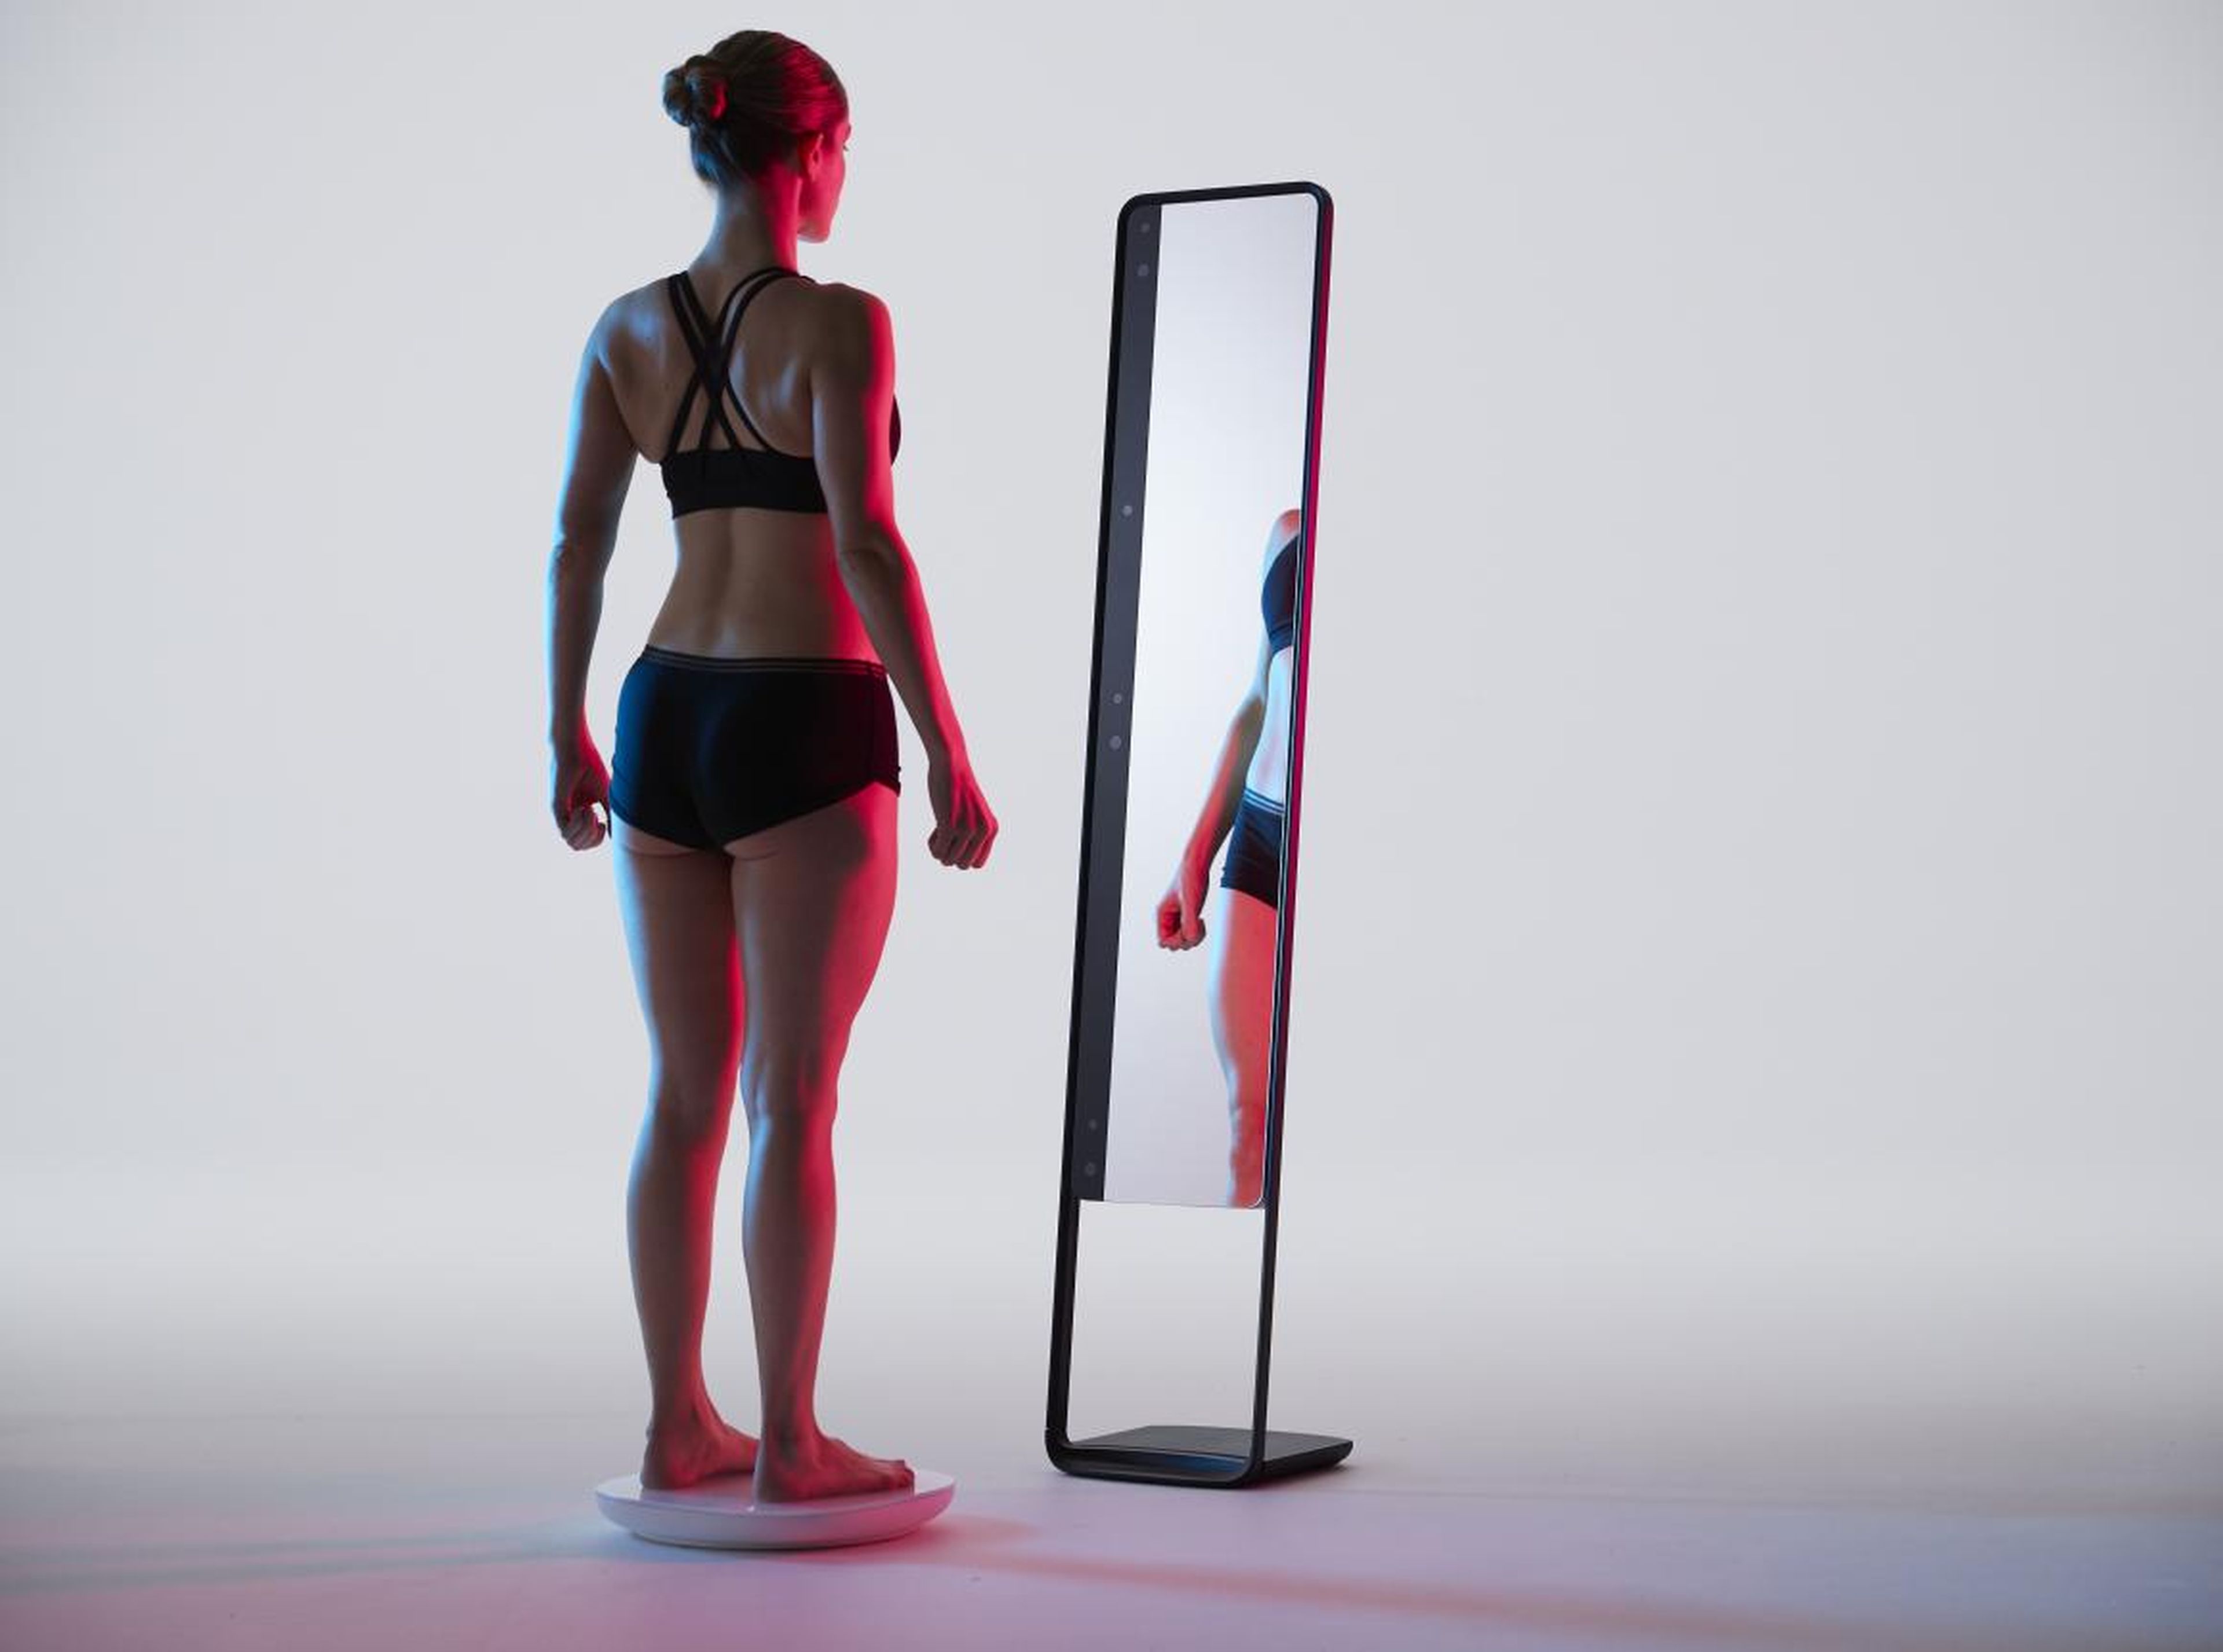 These entrepreneurs invented a futuristic 'magic mirror' to take on the bathroom scale — and investors say its groundbreaking tech could transform the future of fitness